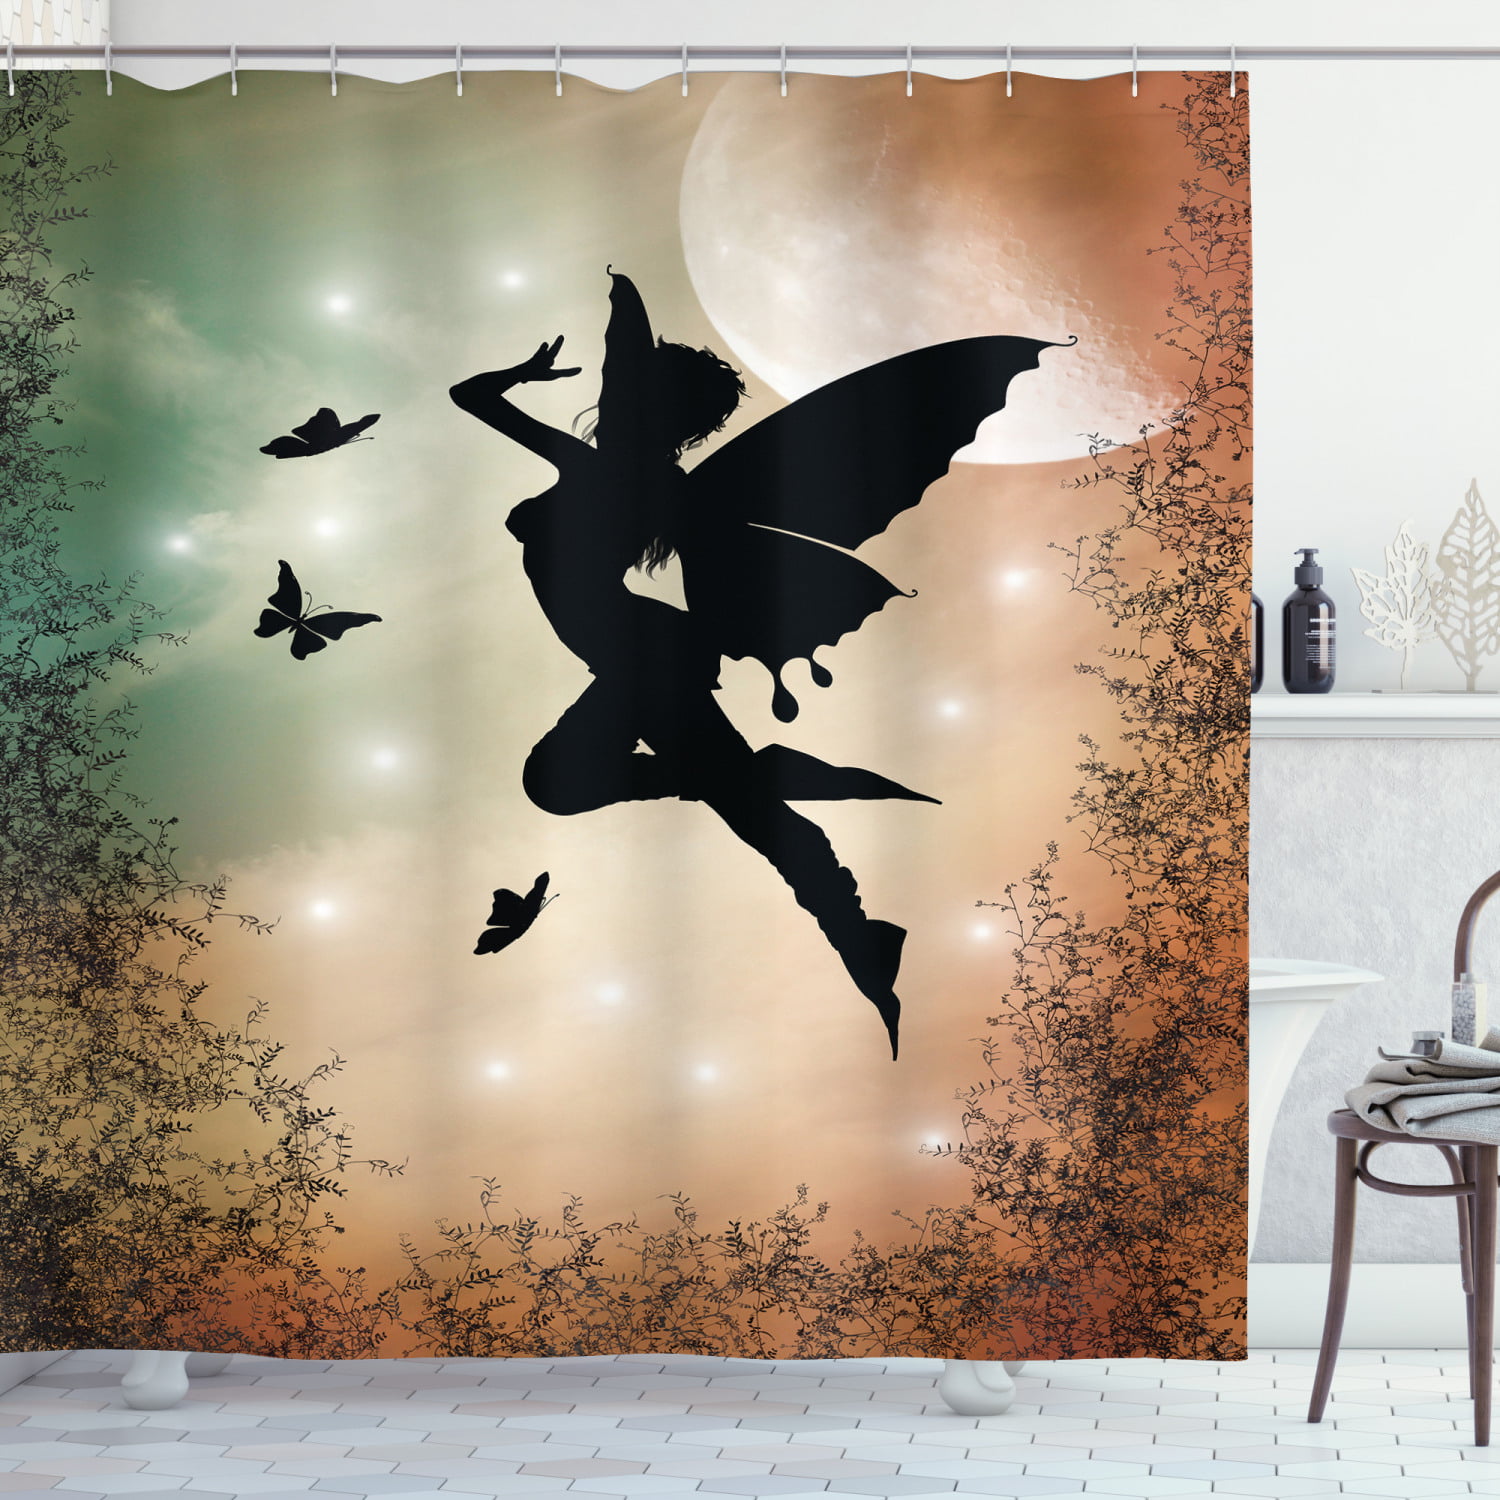 Butterfly Fairies Girl in Forest Bathroom Waterproof Fabric Shower Curtain 71" 